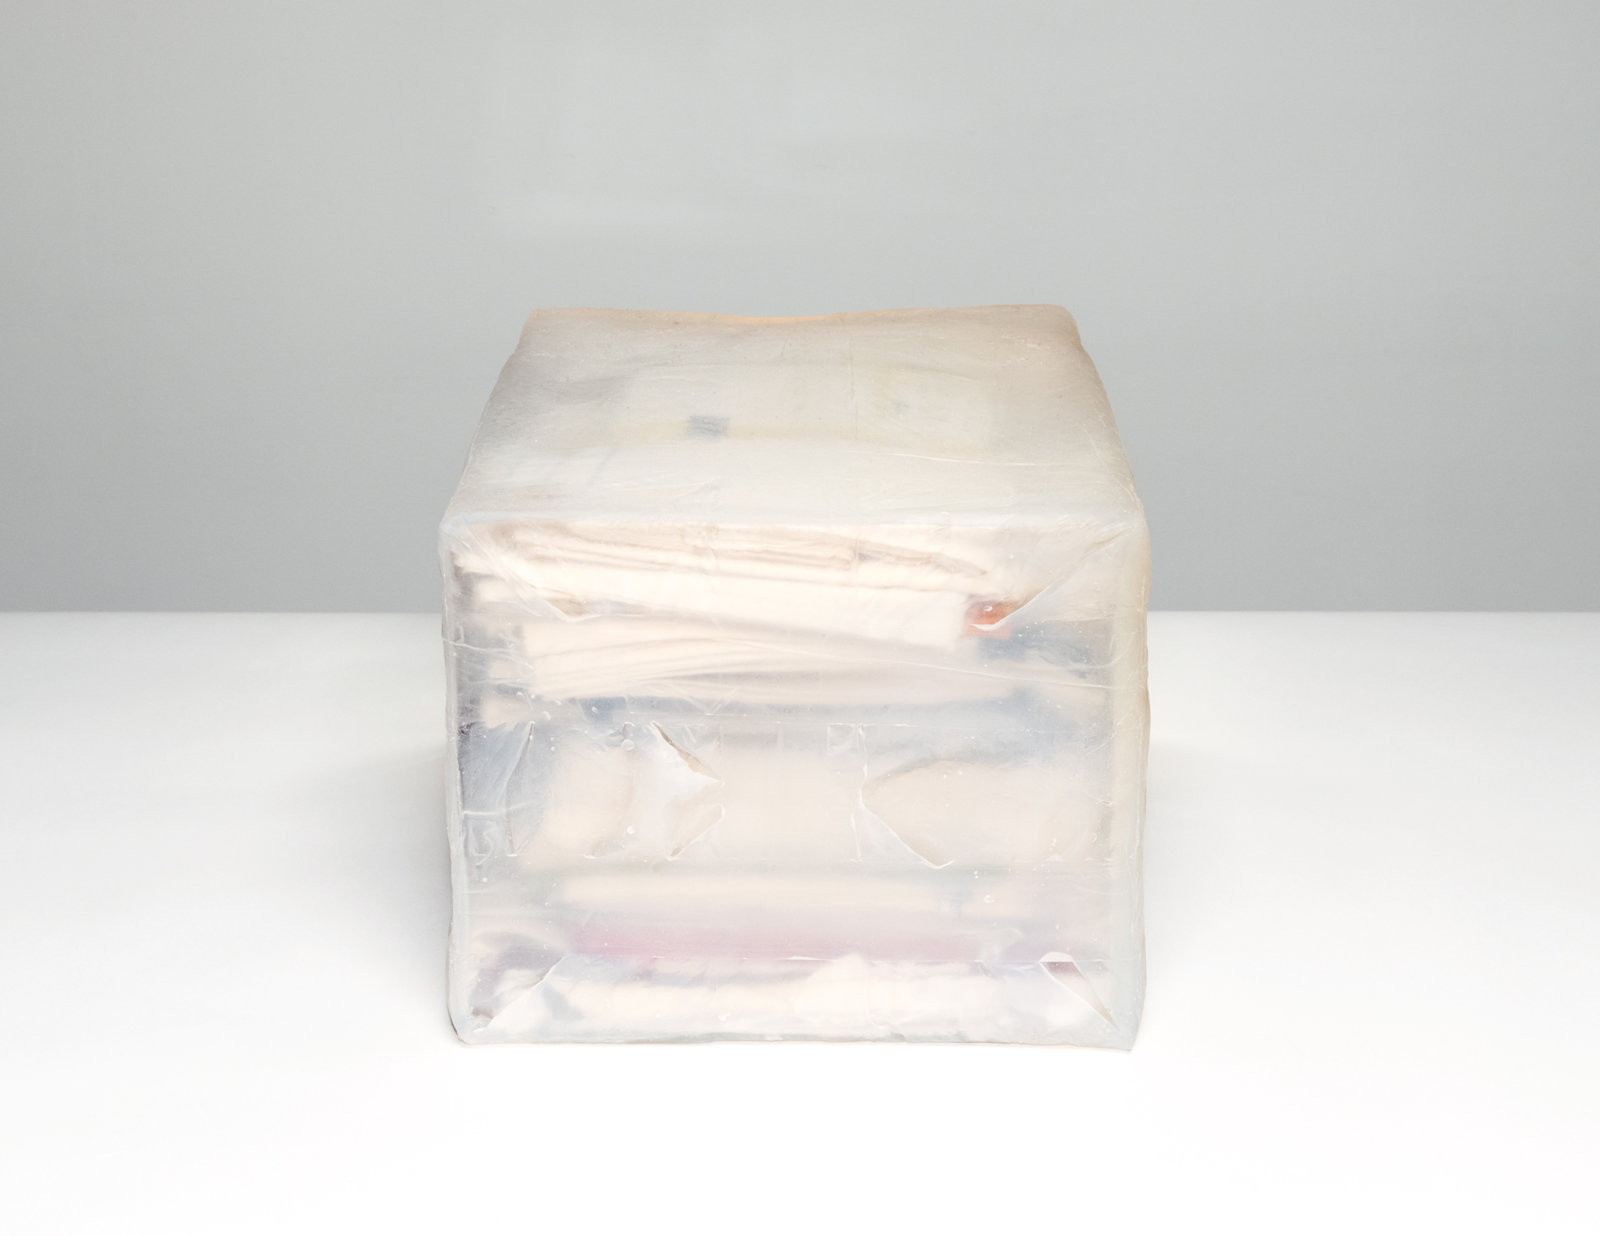 Liz Magor, All the Names II, 2014, silicone rubber, cotton textiles, paper, 11 x 17 x 13 in. (27 x 43 x 33 cm)